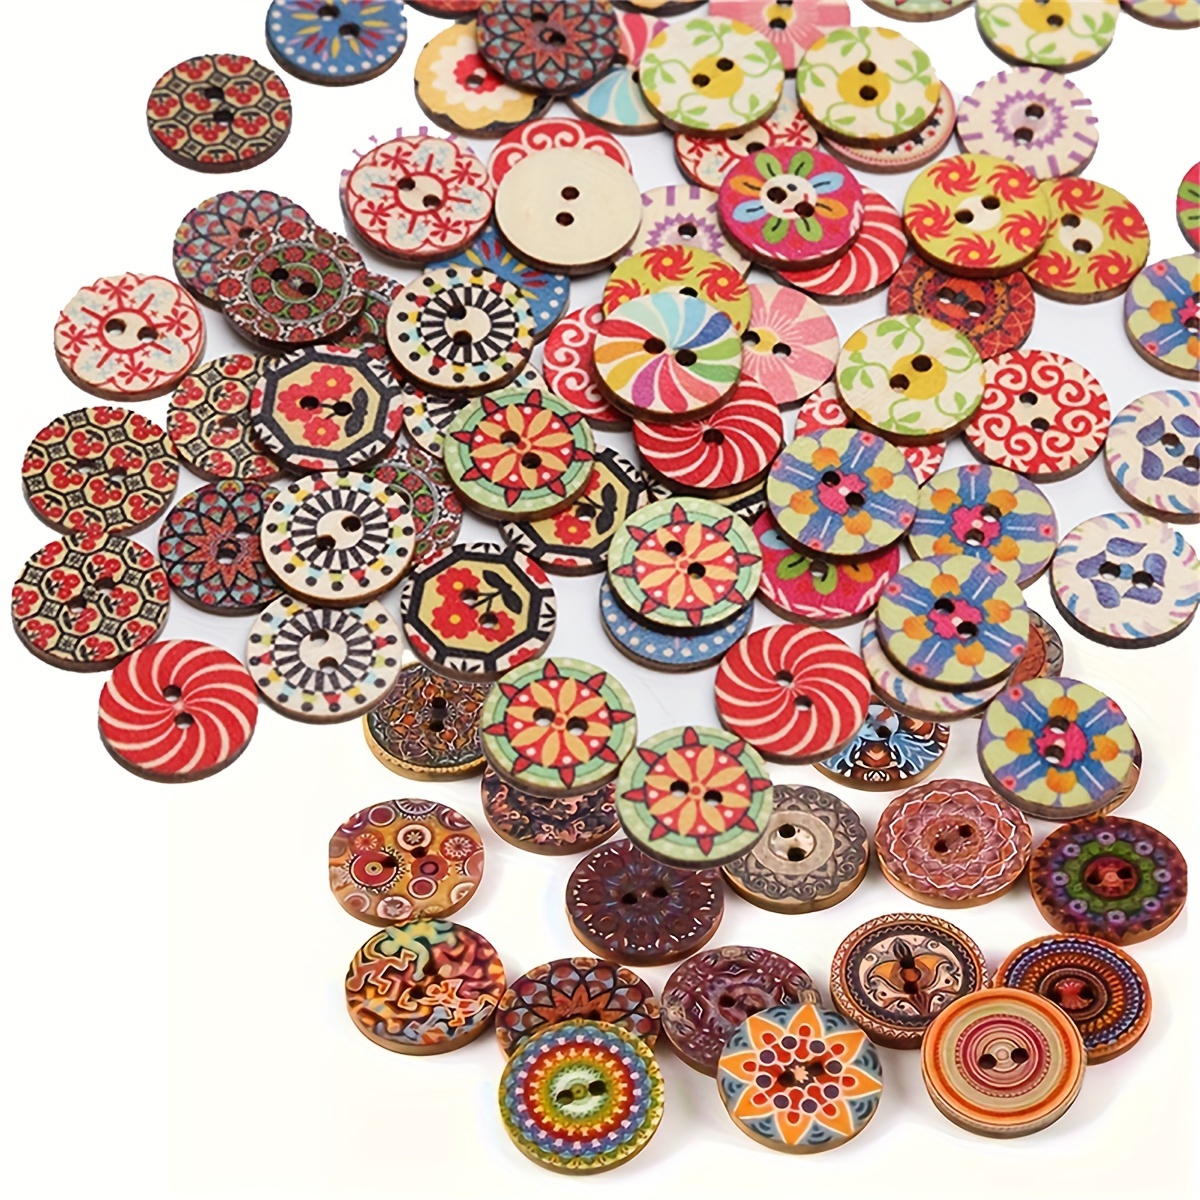 100pcs/lot 15/20mm Round Retro Wooden Buttons for Crafts Handicraft  Accessories Scrapbooking Buttons DIY Painted